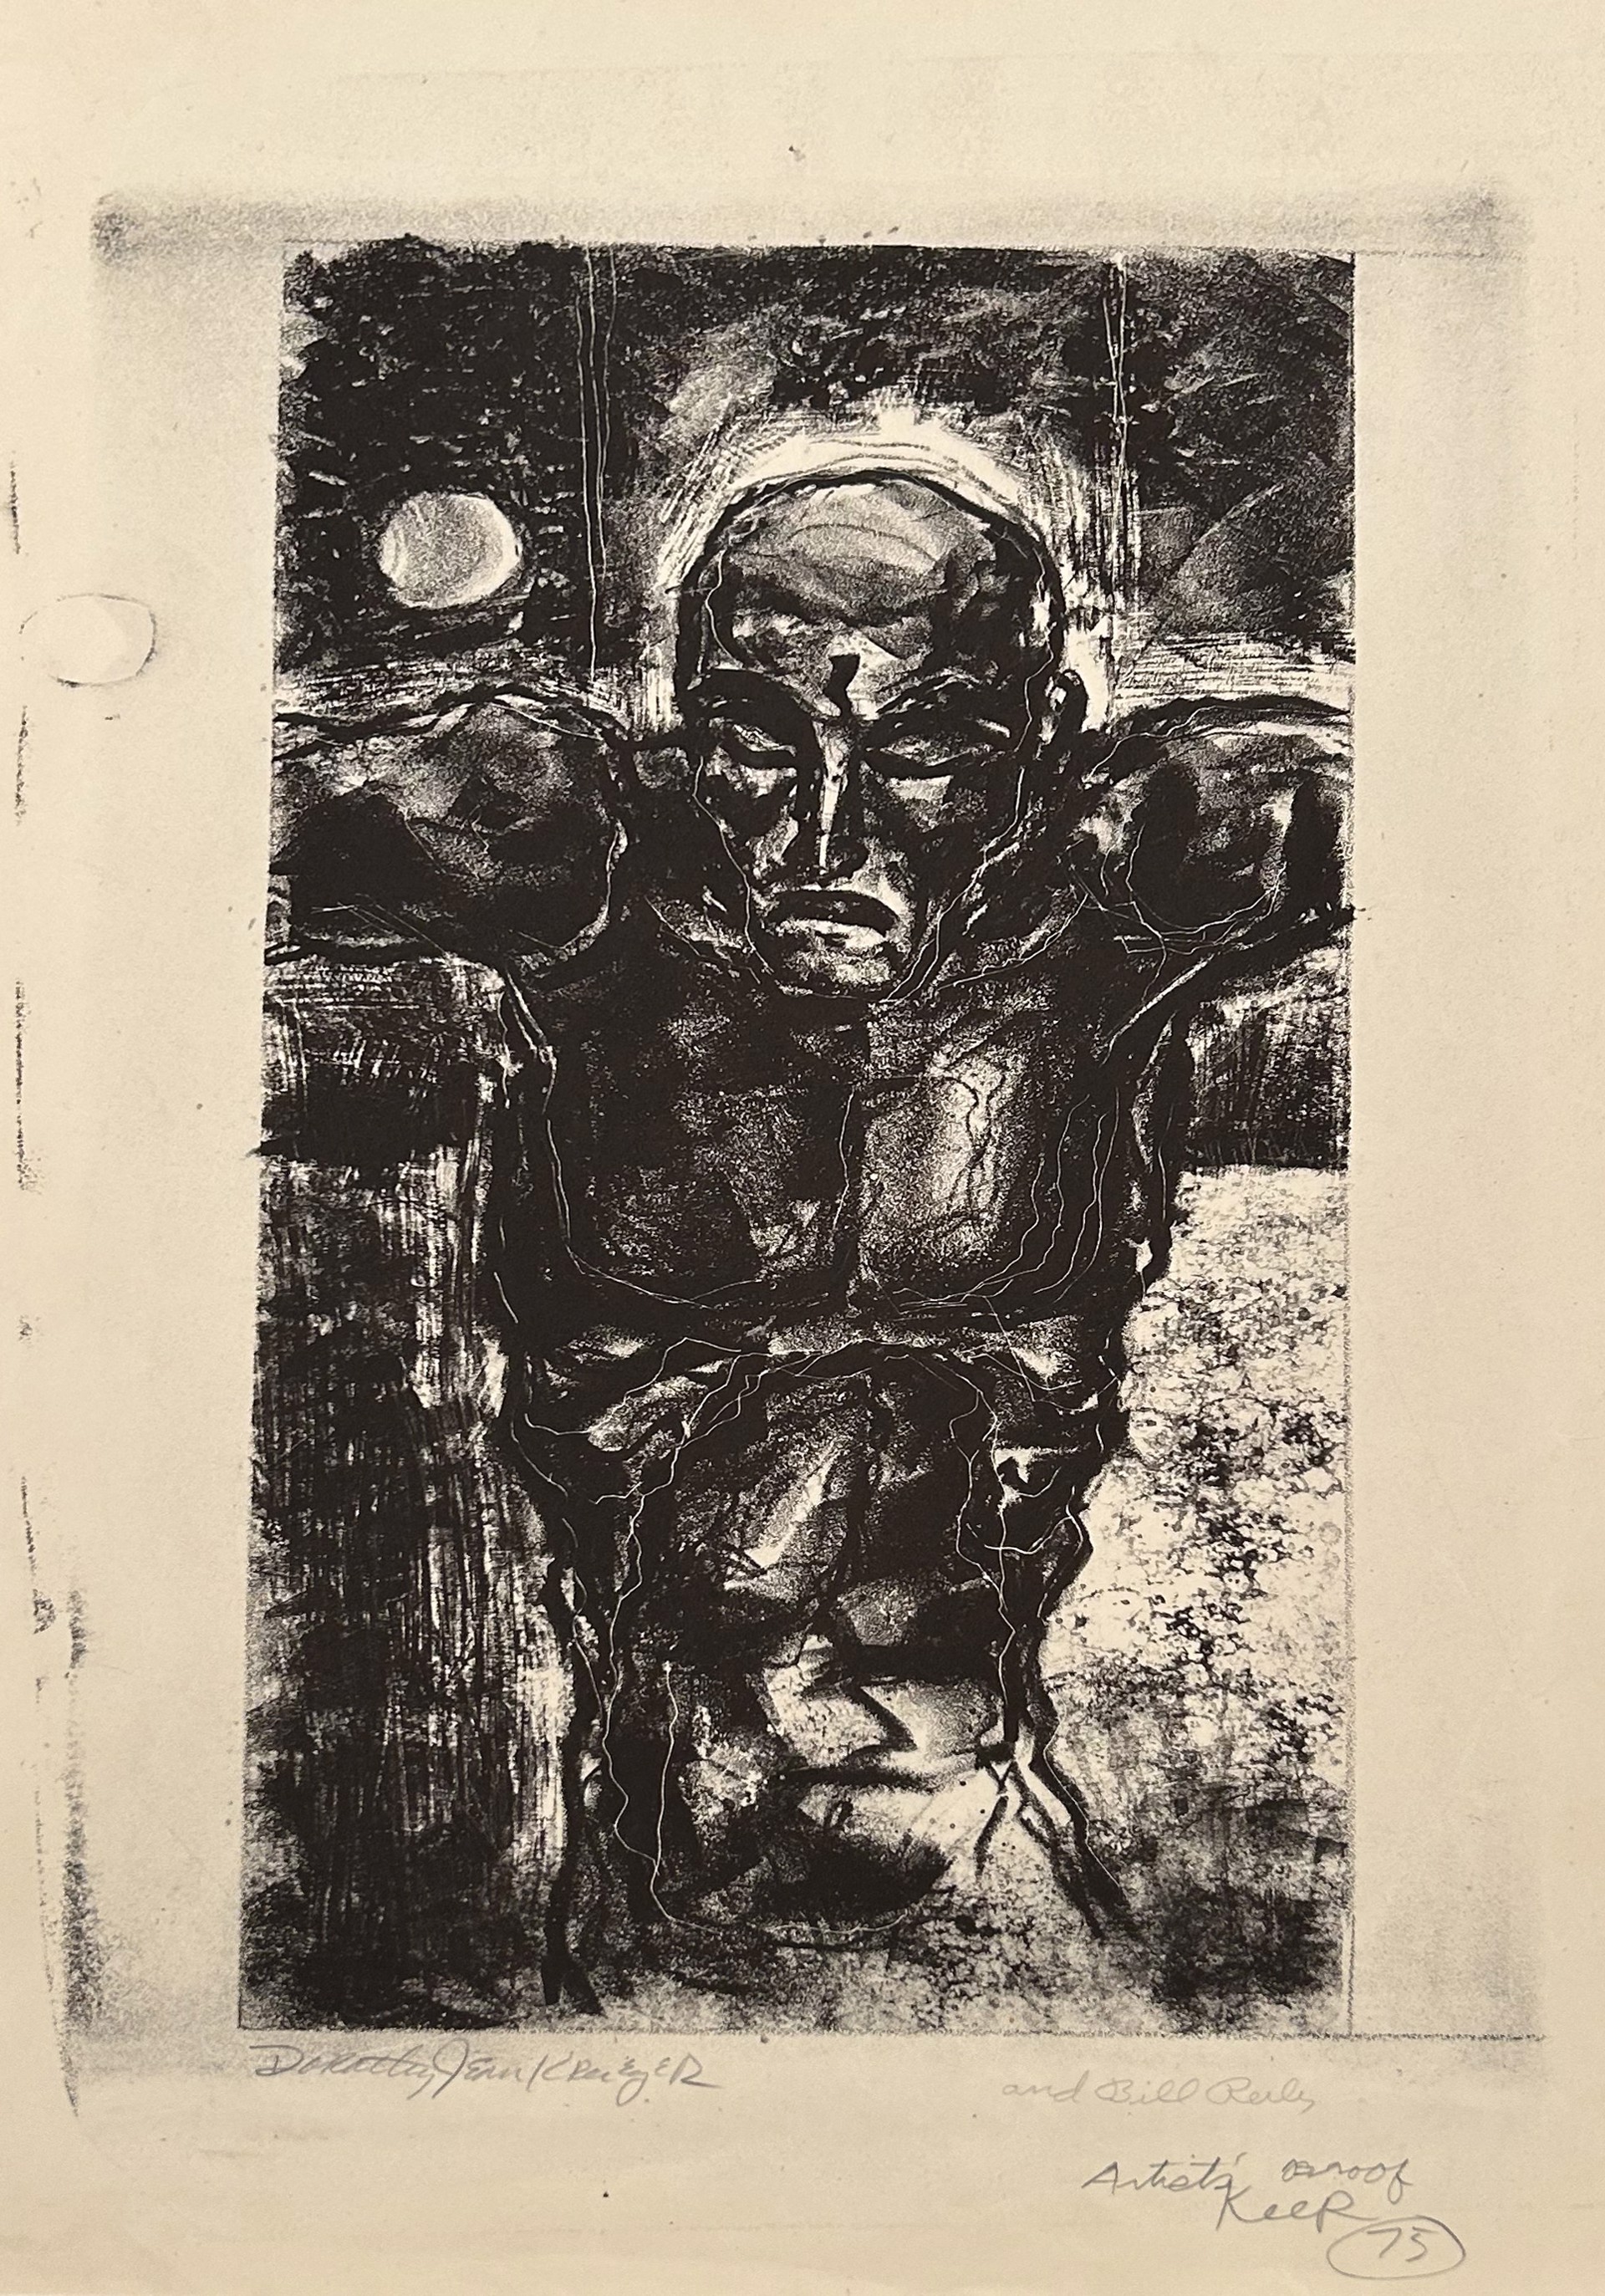 75. Untitled Figure (with Dorothy Jean Kreuger), Artist's Proof by Bill Reily Prints